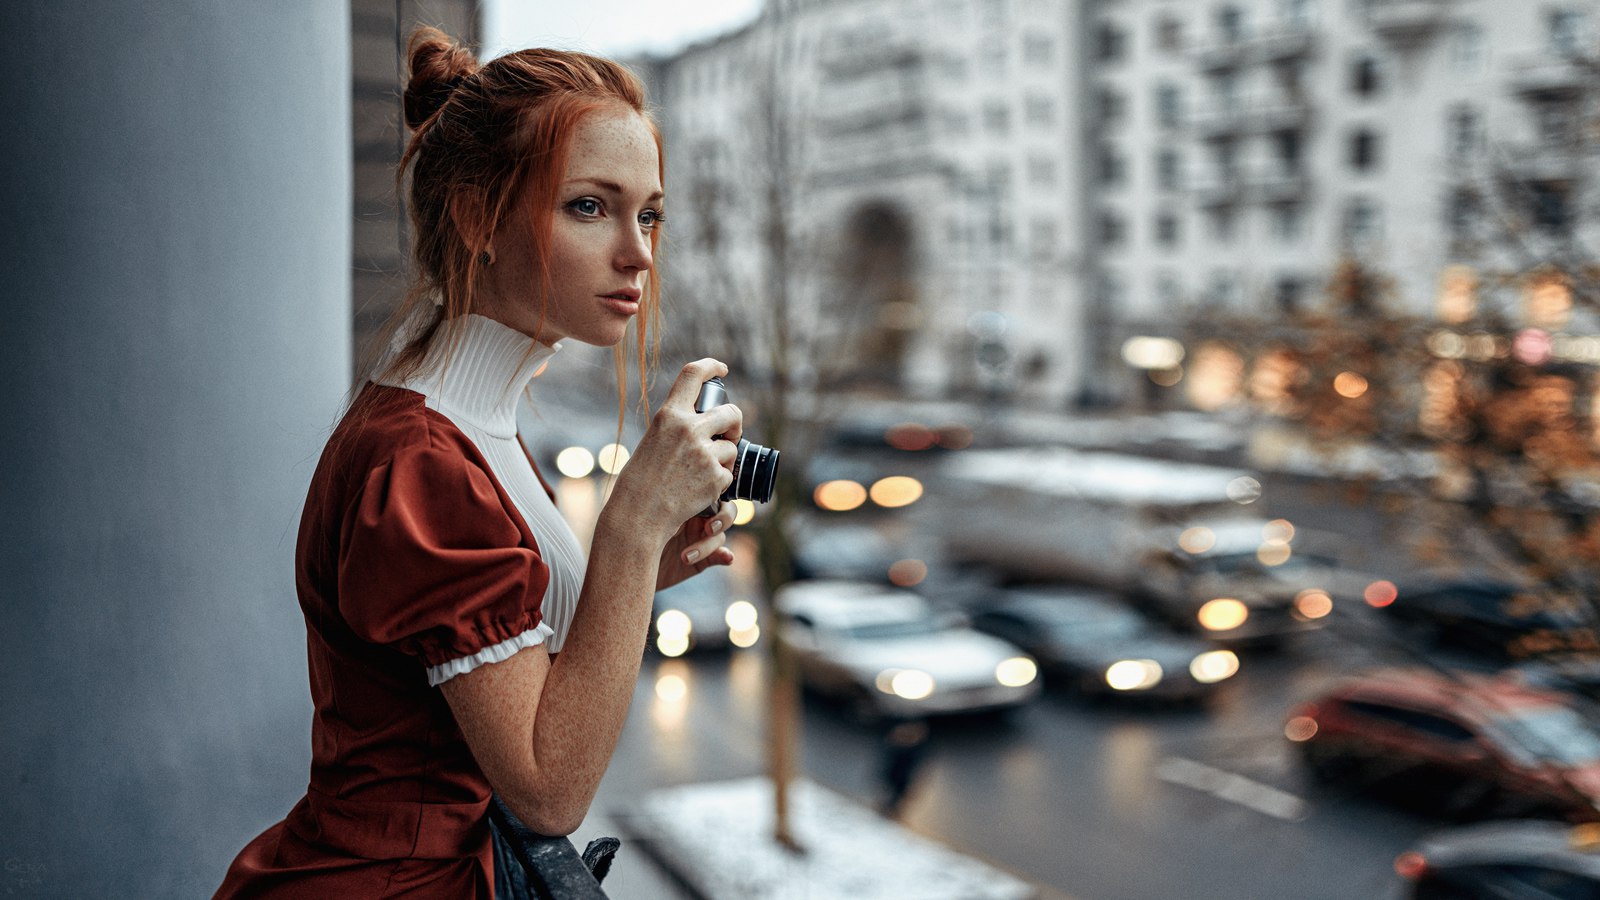 Camera Women Women Outdoors Outdoors Urban Street Car Vehicle Traffic Looking Into The Distance Redh 1600x900